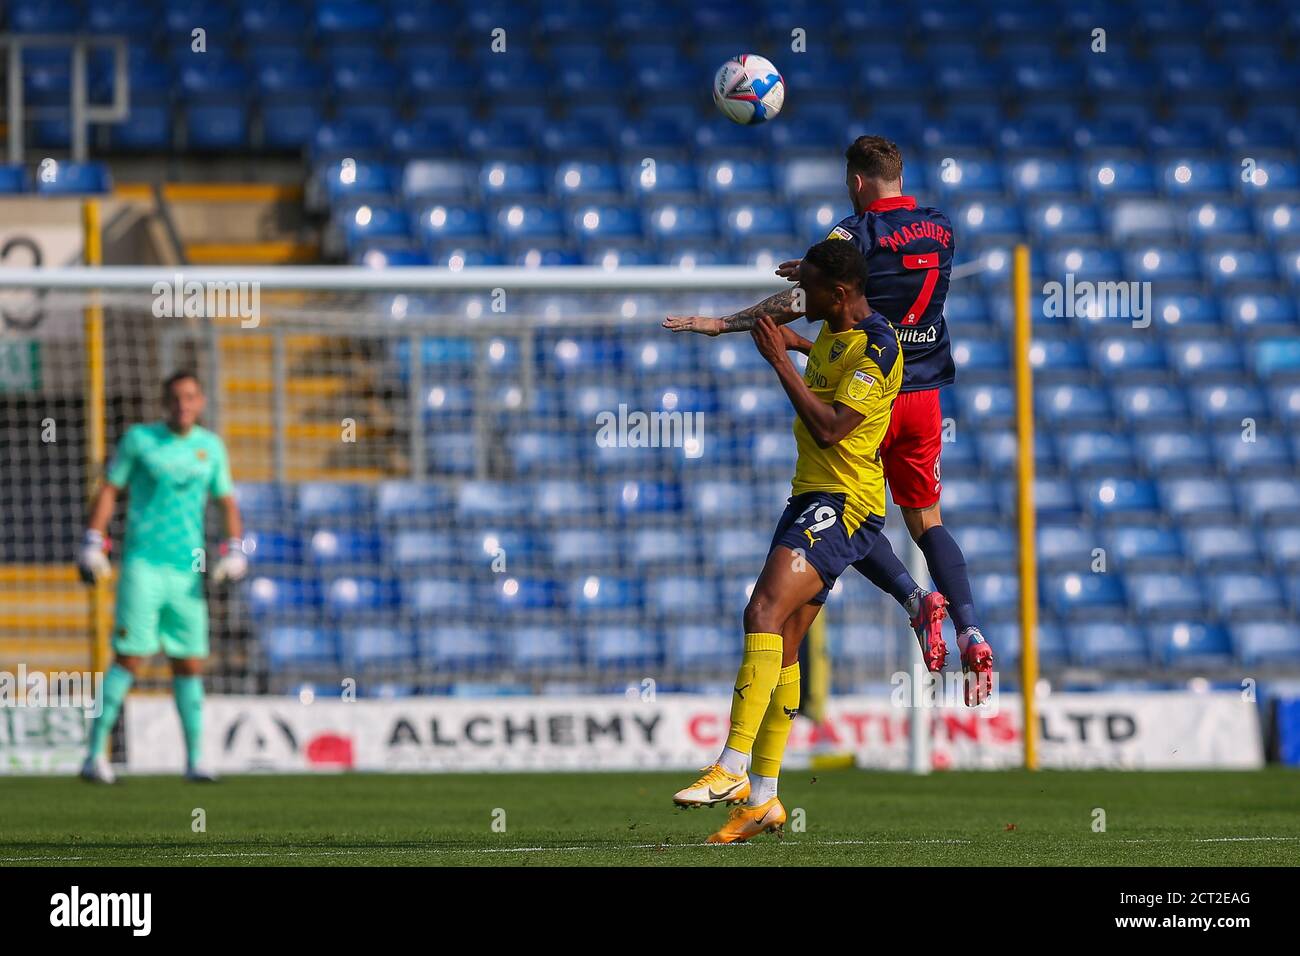 Oxford, UK. 19th Sep, 2020. Derick Osei Yaw of Oxford United and Chris Maguire of Sunderland compete in the air during the Sky Bet League 1 behind closed doors match between Oxford United and Sunderland at the Kassam Stadium, Oxford, England on 19 September 2020. Photo by Nick Browning/PRiME Media Images. Credit: PRiME Media Images/Alamy Live News Stock Photo